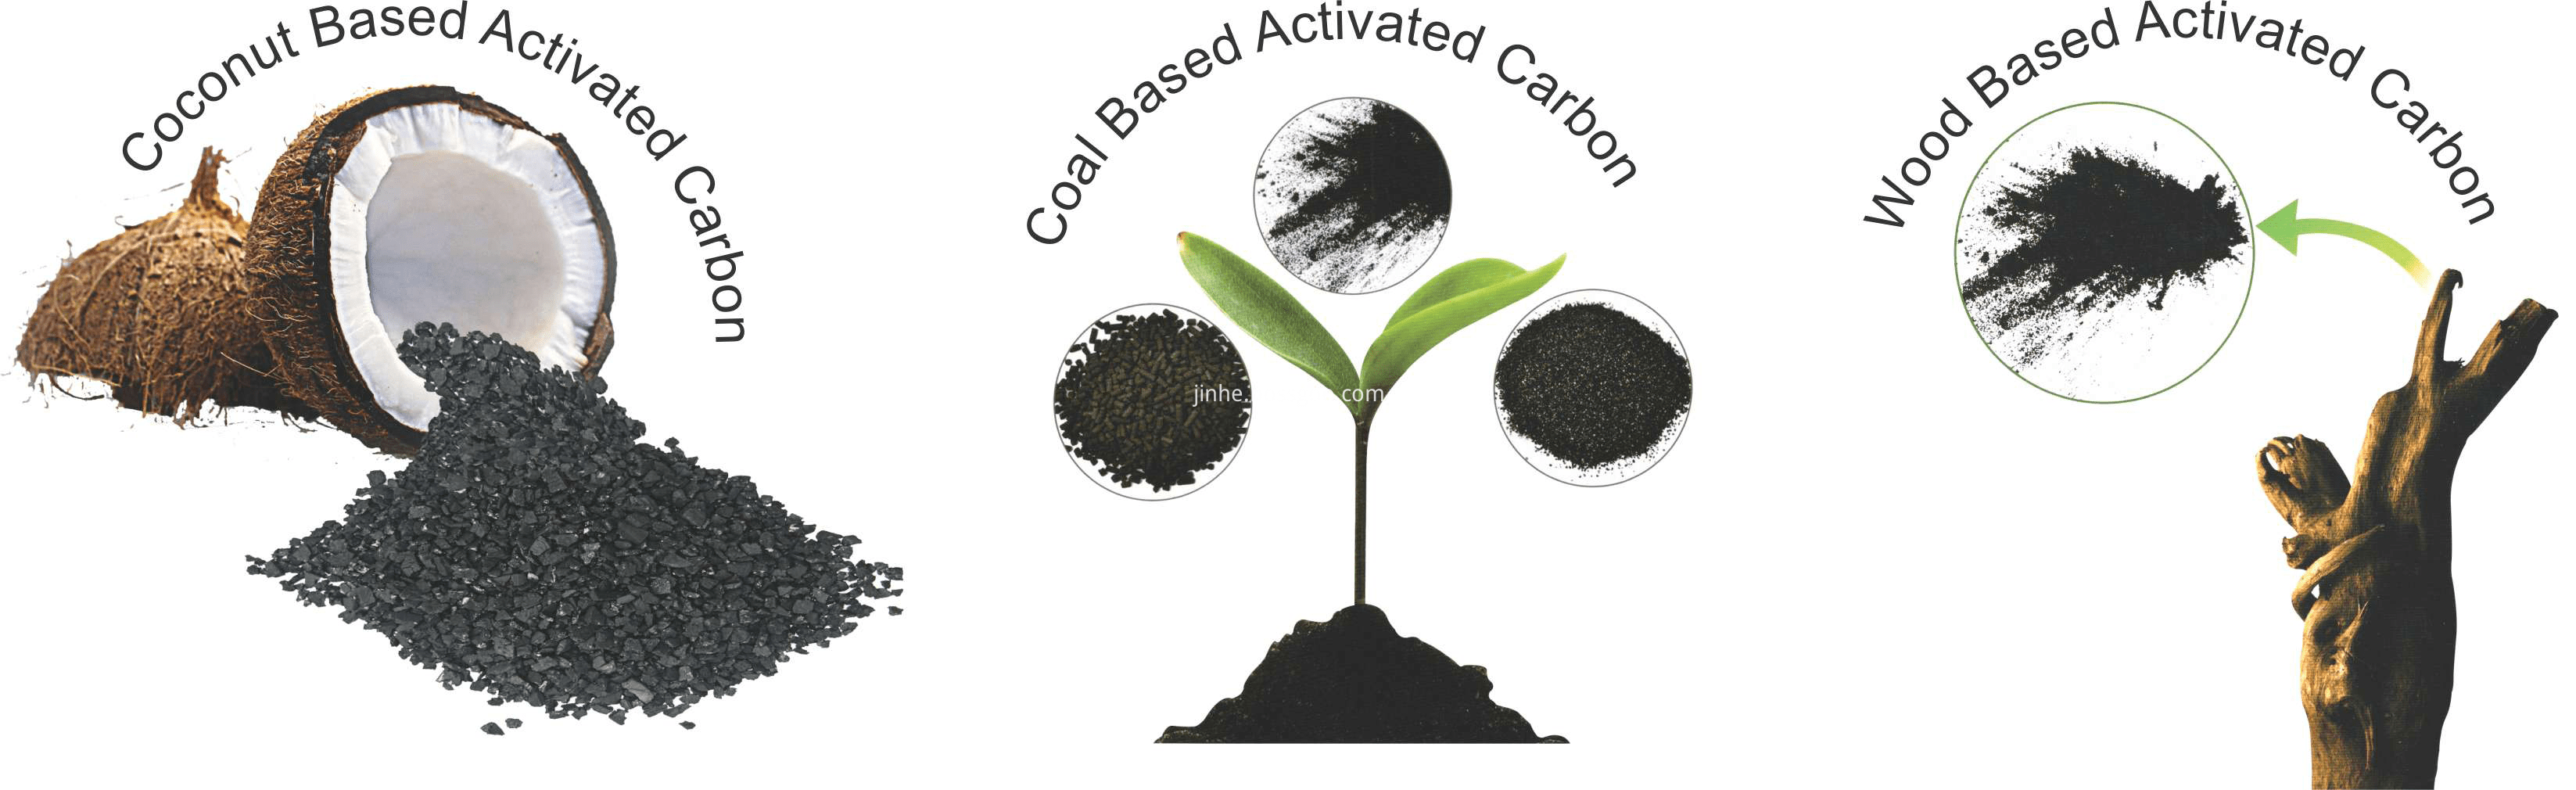 Activated Carbon Black For Water Chlorine Removal